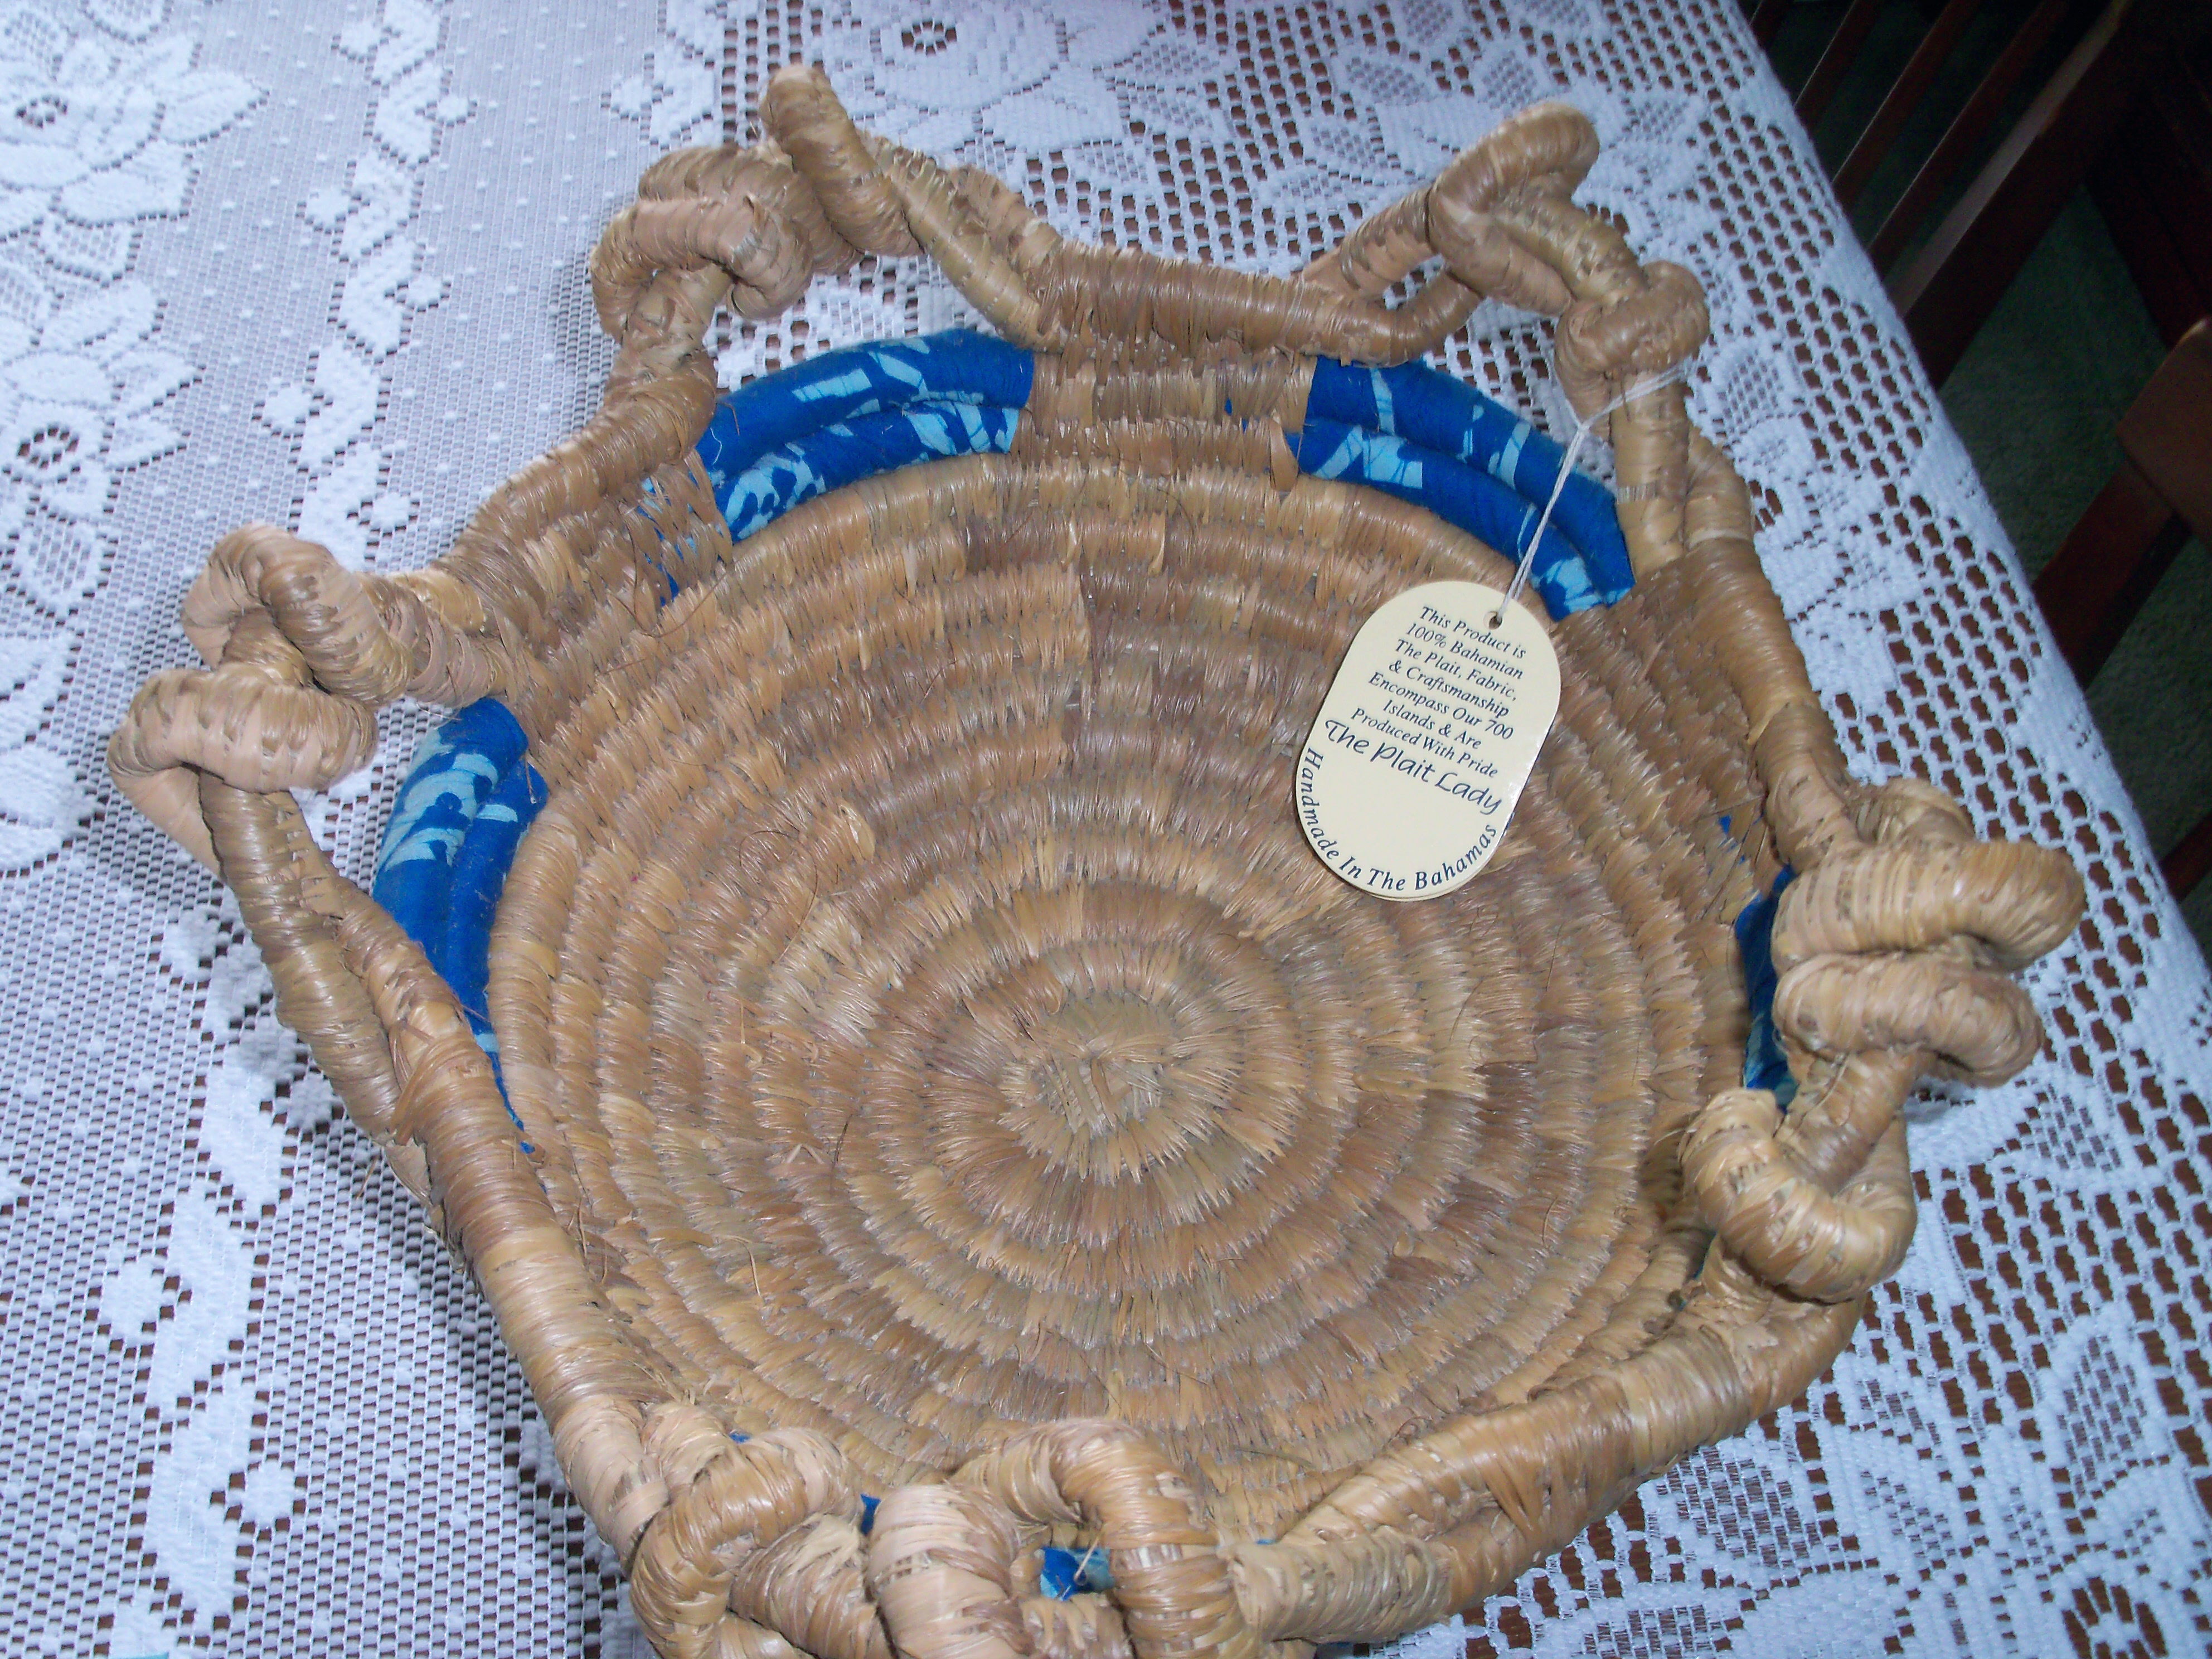 Basket from The Plait Lady